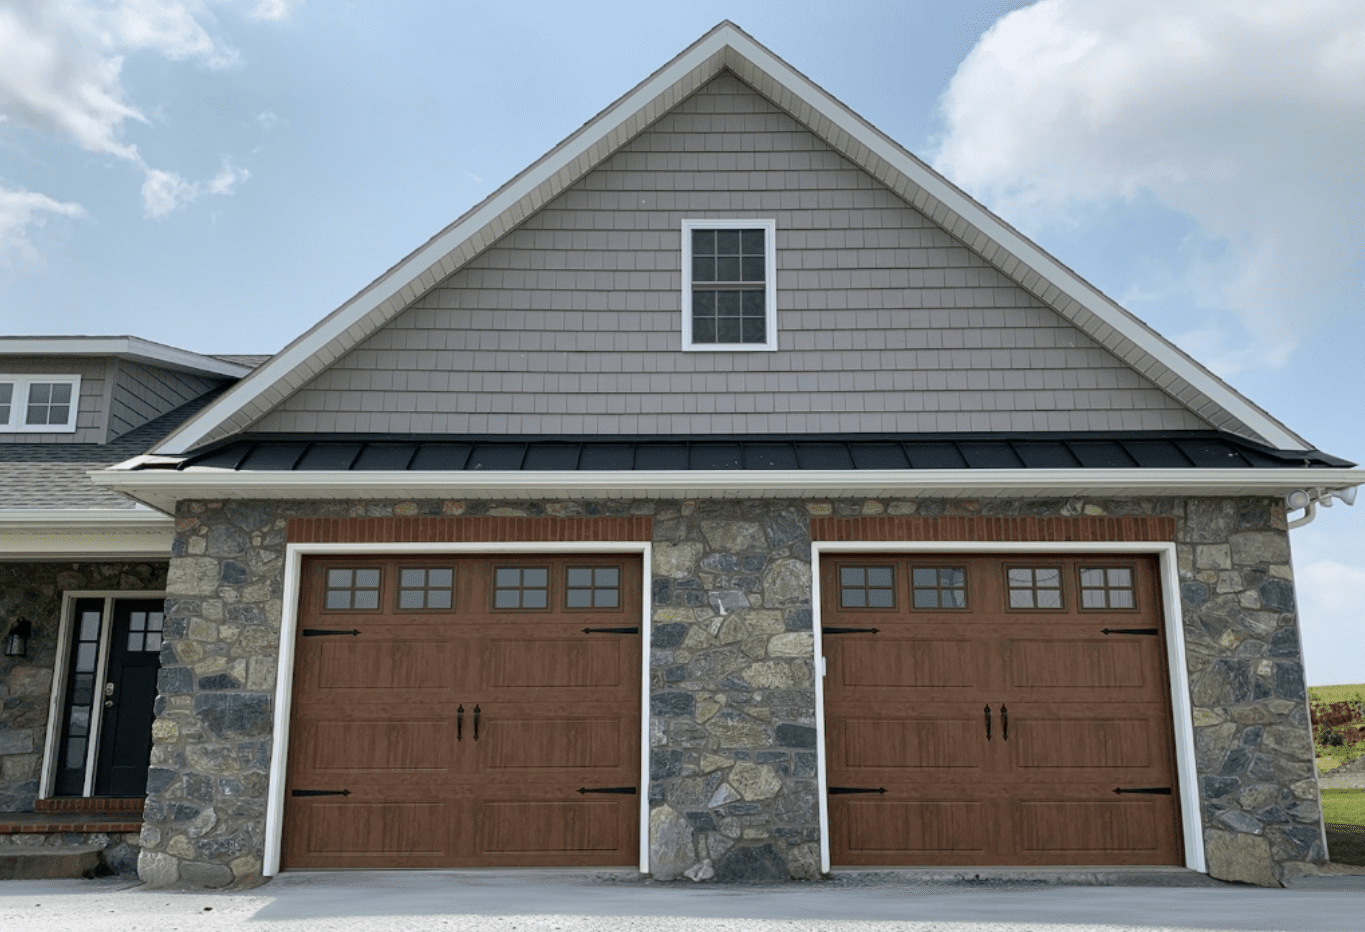 A home with two garage doors and a stone front.